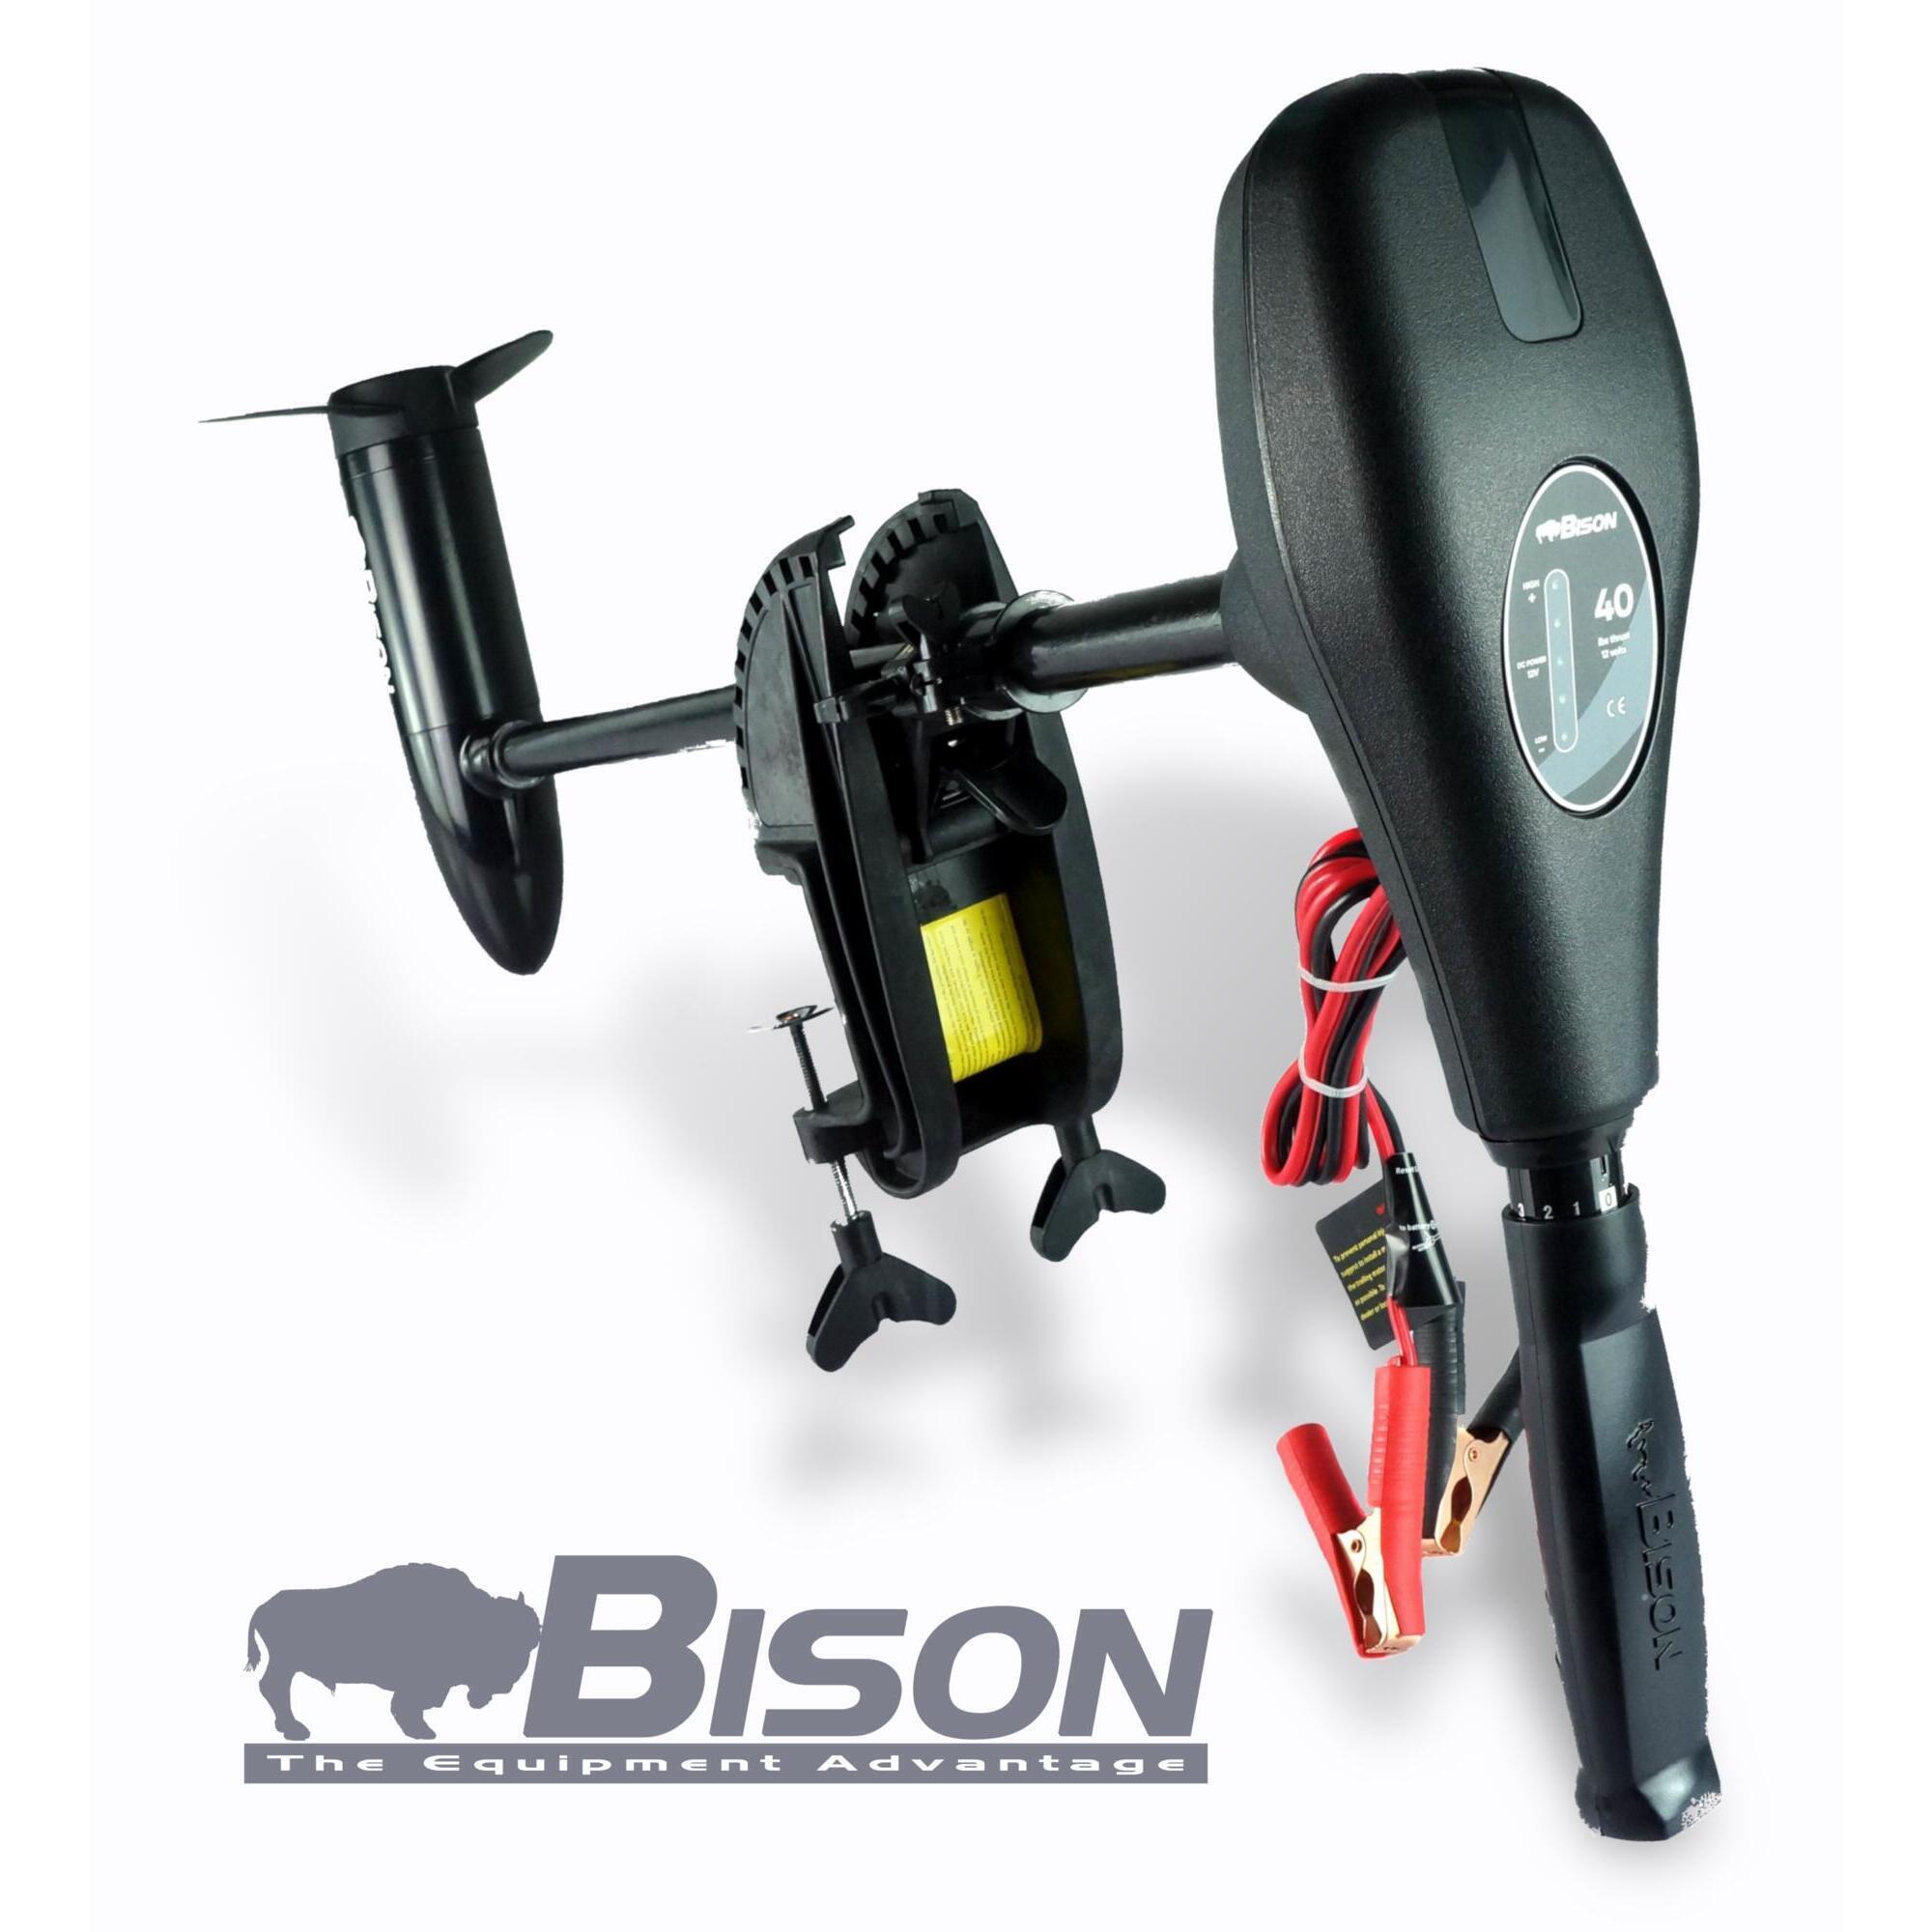 Buy any Bison Outboard and get 20% OFF a Bison Battery Box.